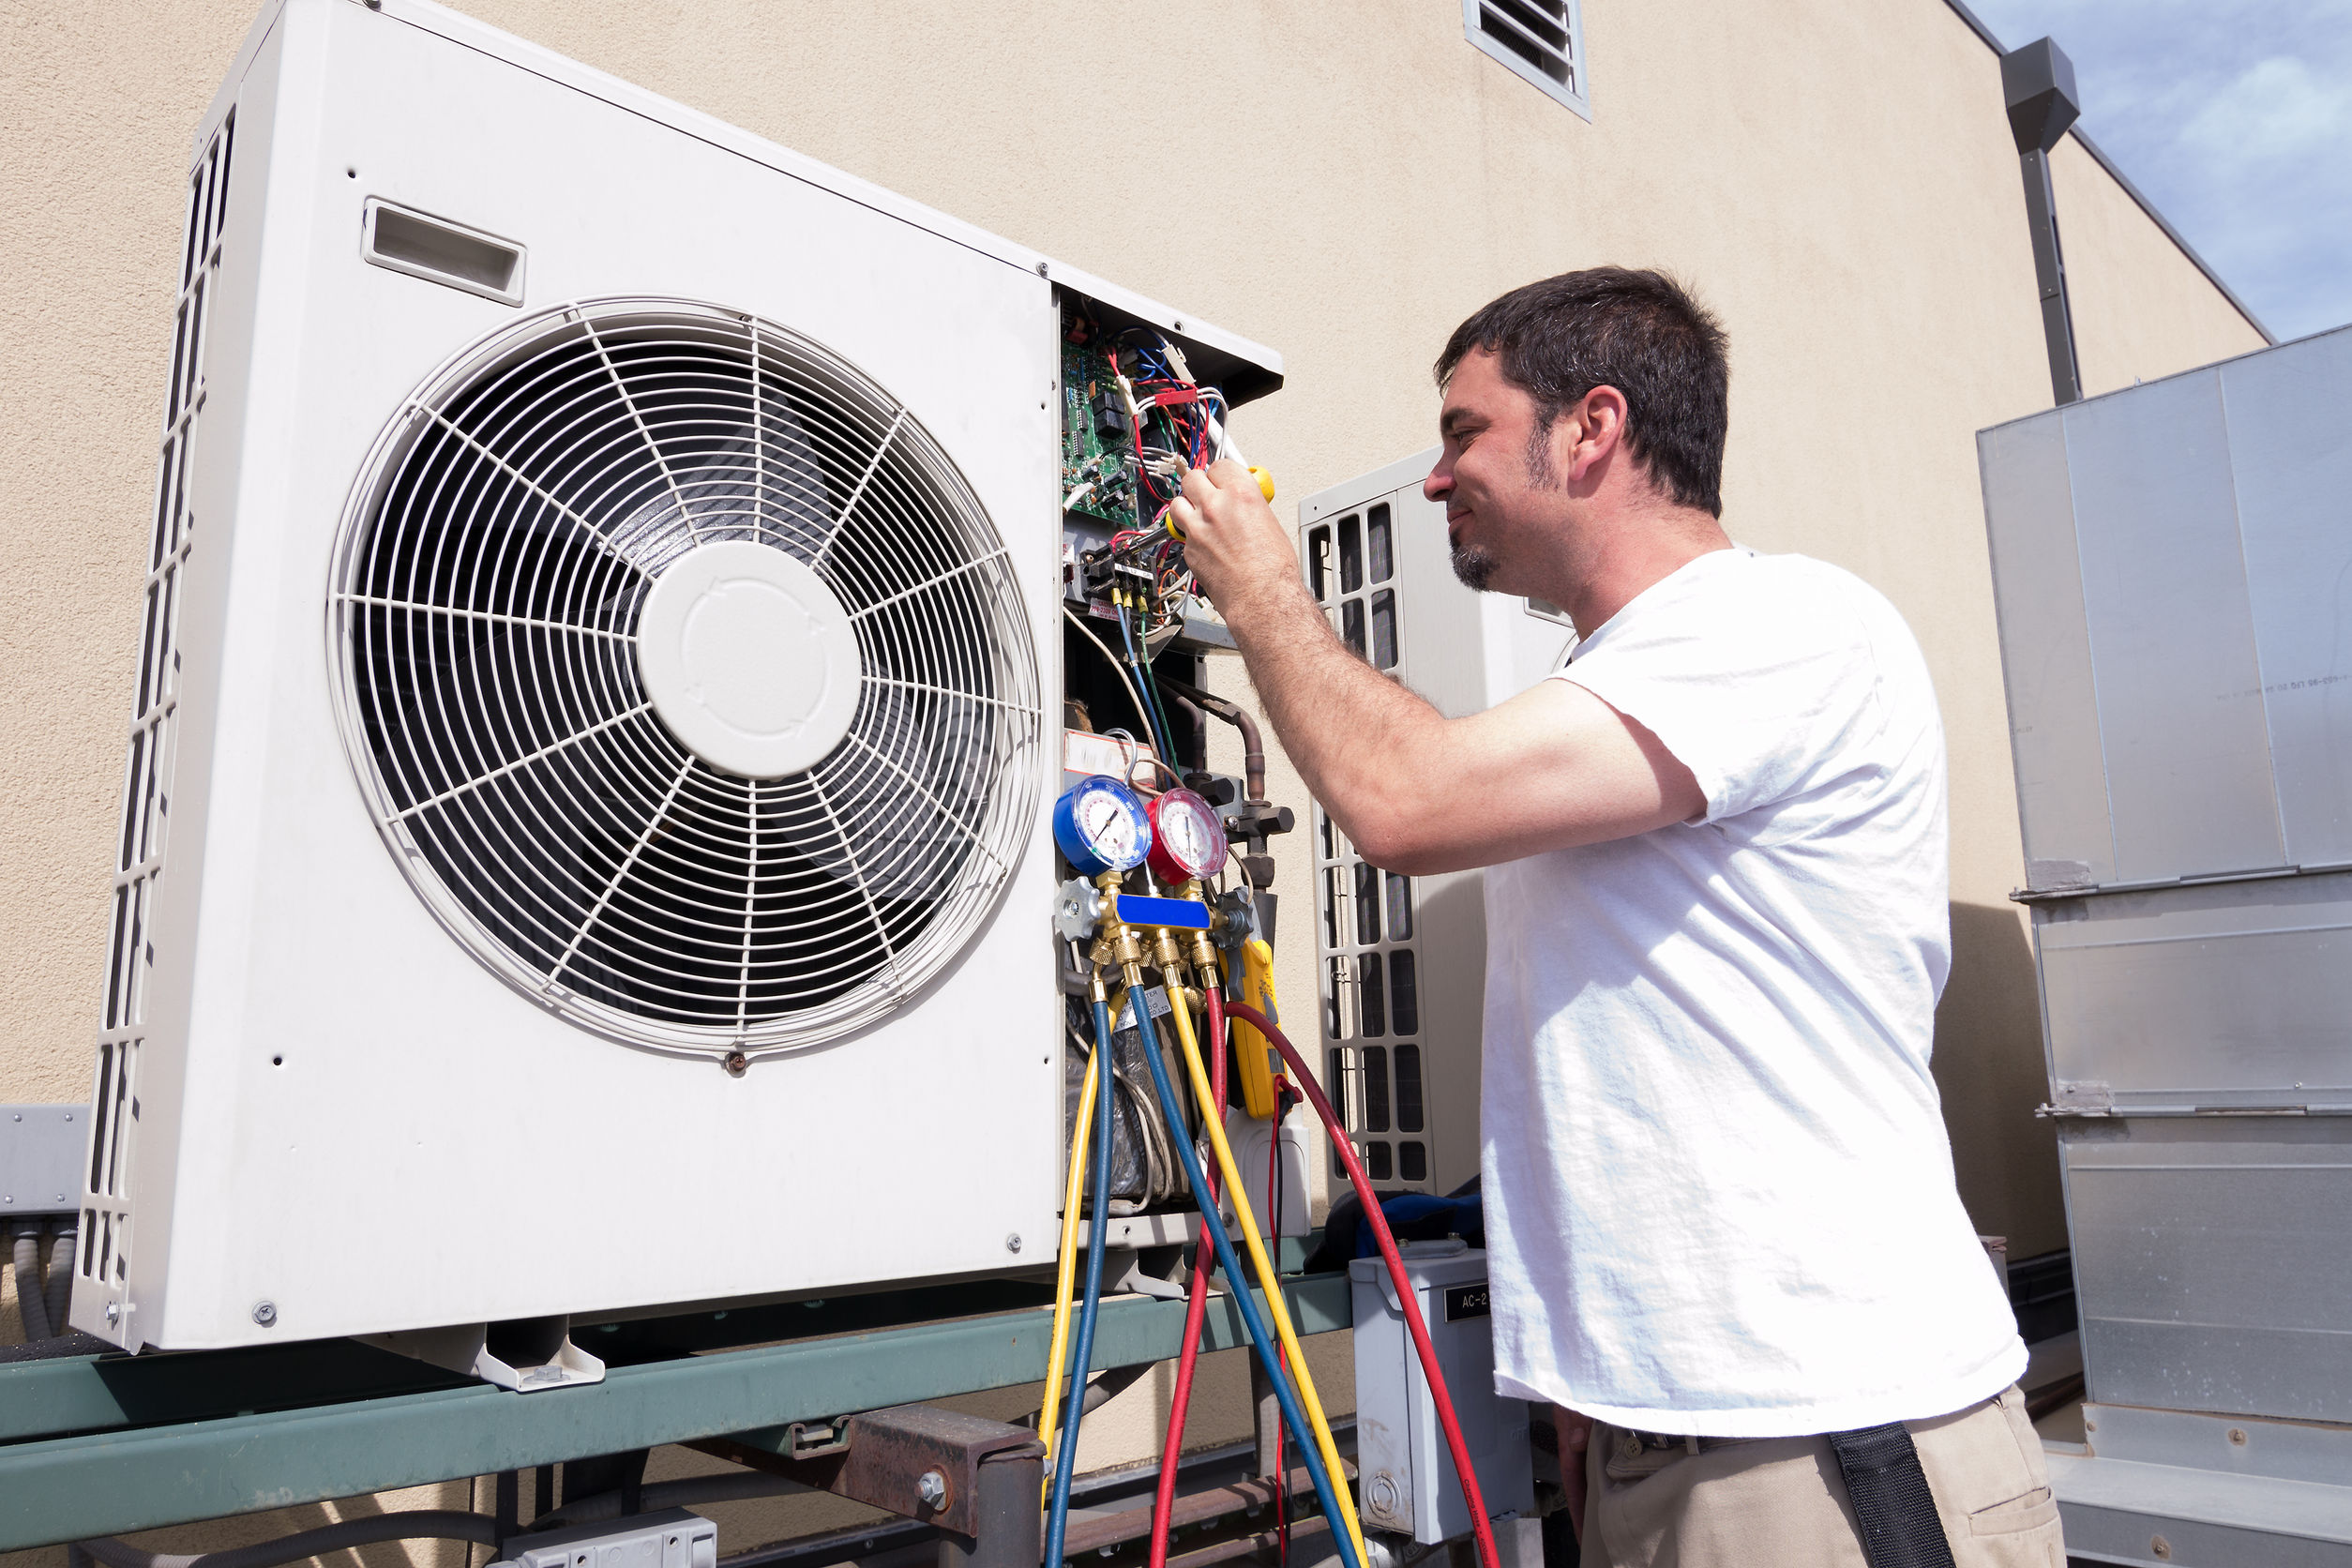 How to Locate the Best Evanston Air Conditioning Specialists for Your Home